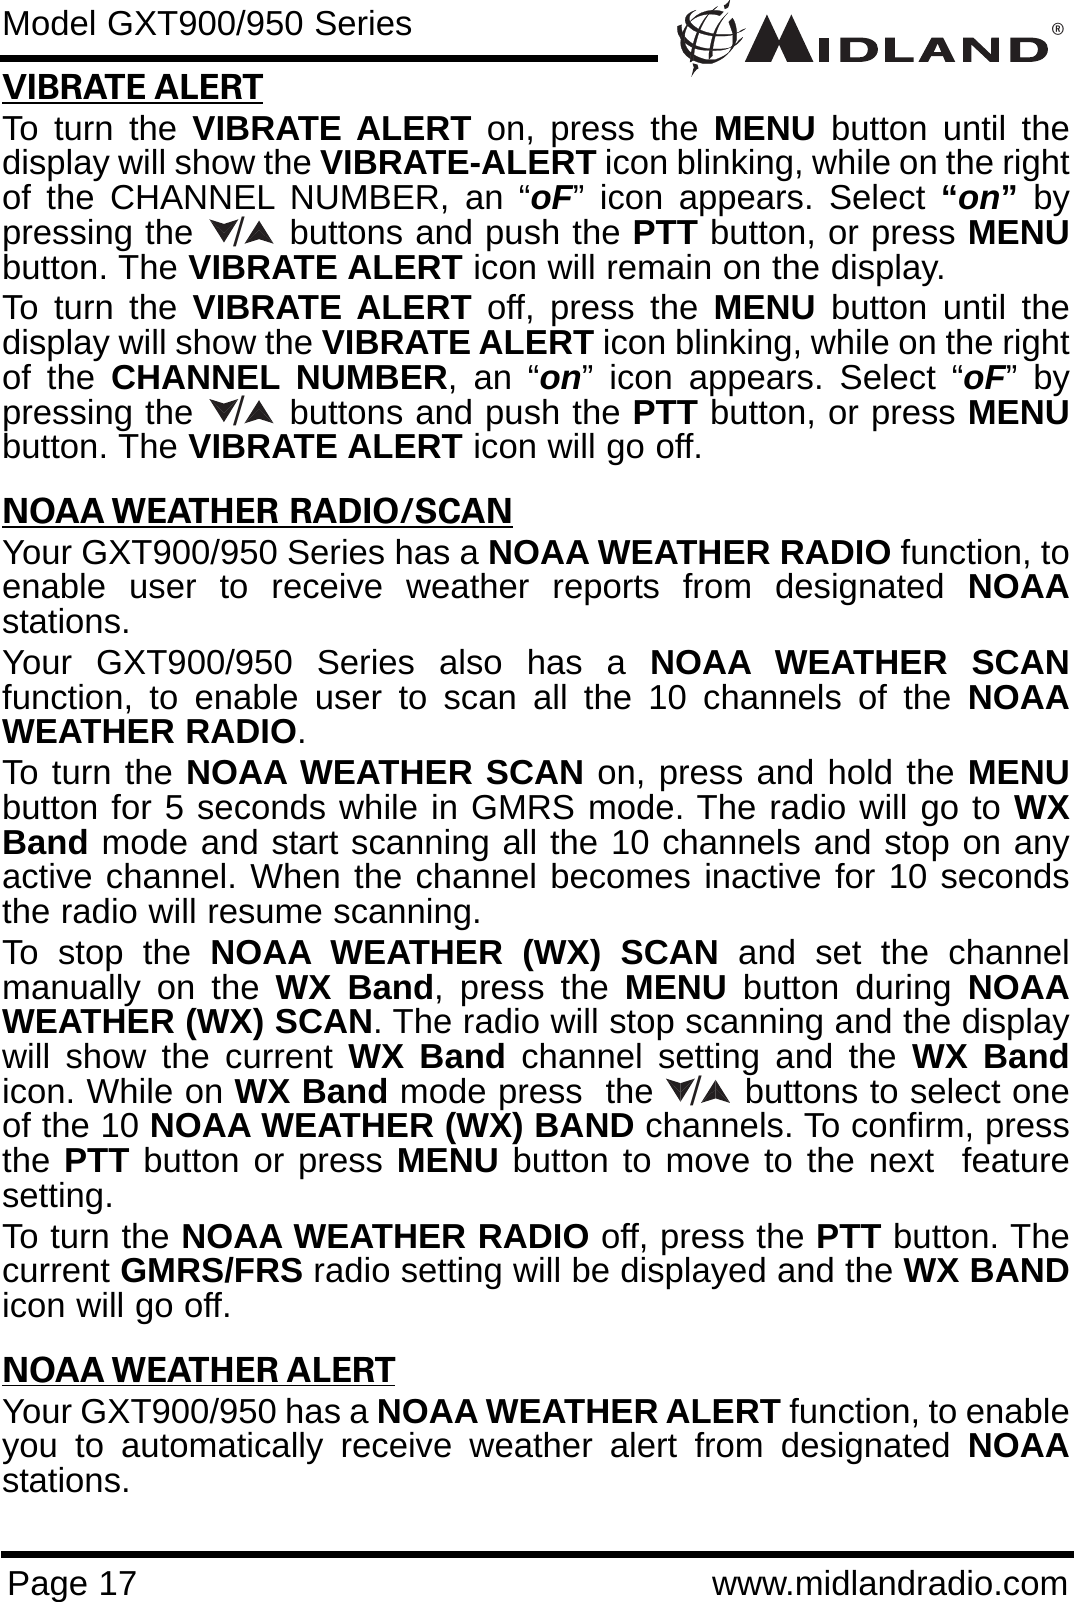 ®Page 17 www.midlandradio.comVIBRATE ALERTTo turn the VIBRATE ALERT on, press the MENU button until thedisplay will show the VIBRATE-ALERT icon blinking, while on the rightof the CHANNEL NUMBER, an “oF” icon appears. Select “on”bypressing the        buttons and push the PTT button, or press MENUbutton. The VIBRATE ALERT icon will remain on the display.To turn the VIBRATE ALERT off, press the MENU button until thedisplay will show the VIBRATE ALERT icon blinking, while on the rightof the CHANNEL NUMBER, an “on” icon appears. Select “oF” bypressing the        buttons and push the PTT button, or press MENUbutton. The VIBRATE ALERT icon will go off.NOAA WEATHER RADIO/SCANYour GXT900/950 Series has a NOAA WEATHER RADIO function, toenable user to receive weather reports from designated NOAAstations. Your GXT900/950 Series also has a NOAA WEATHER SCANfunction, to enable user to scan all the 10 channels of the NOAAWEATHER RADIO. To turn the NOAA WEATHER SCAN on, press and hold the MENUbutton for 5 seconds while in GMRS mode. The radio will go to WXBand mode and start scanning all the 10 channels and stop on anyactive channel. When the channel becomes inactive for 10 secondsthe radio will resume scanning.To stop the NOAA WEATHER (WX) SCAN and set the channelmanually on the WX Band, press the MENU button during NOAAWEATHER (WX) SCAN. The radio will stop scanning and the displaywill show the current WX Band channel setting and the WX Bandicon. While on WX Band mode press  the        buttons to select oneof the 10 NOAA WEATHER (WX) BAND channels. To confirm, pressthe PTT button or press MENU button to move to the next  featuresetting.To turn the NOAA WEATHER RADIO off, press the PTT button. Thecurrent GMRS/FRS radio setting will be displayed and the WX BANDicon will go off.NOAA WEATHER ALERTYour GXT900/950 has a NOAA WEATHER ALERT function, to enableyou to automatically receive weather alert from designated NOAAstations. Model GXT900/950 Series///